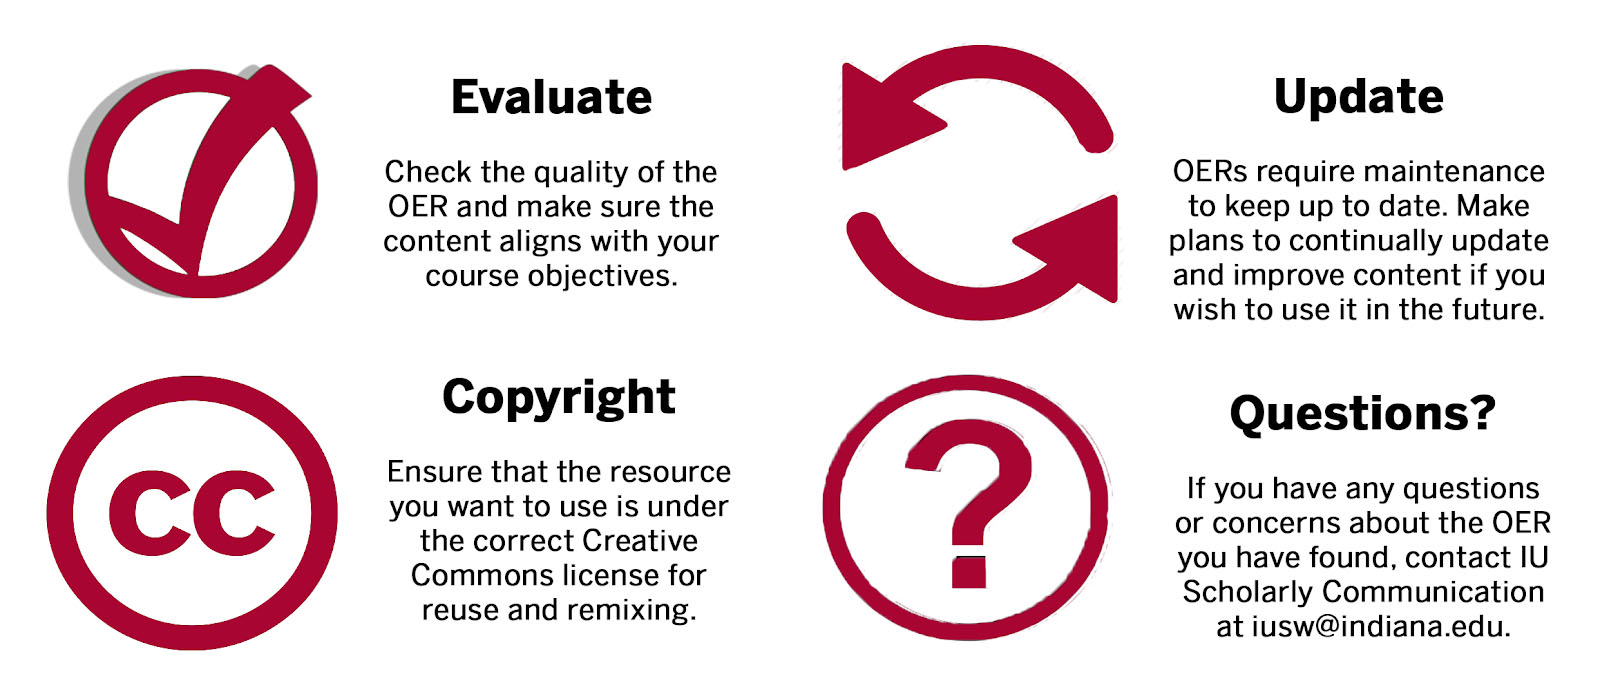 infographic that advises instructors to evaluate, update, and review copyright for OER. Contact iusw@indiana.edu with questions.